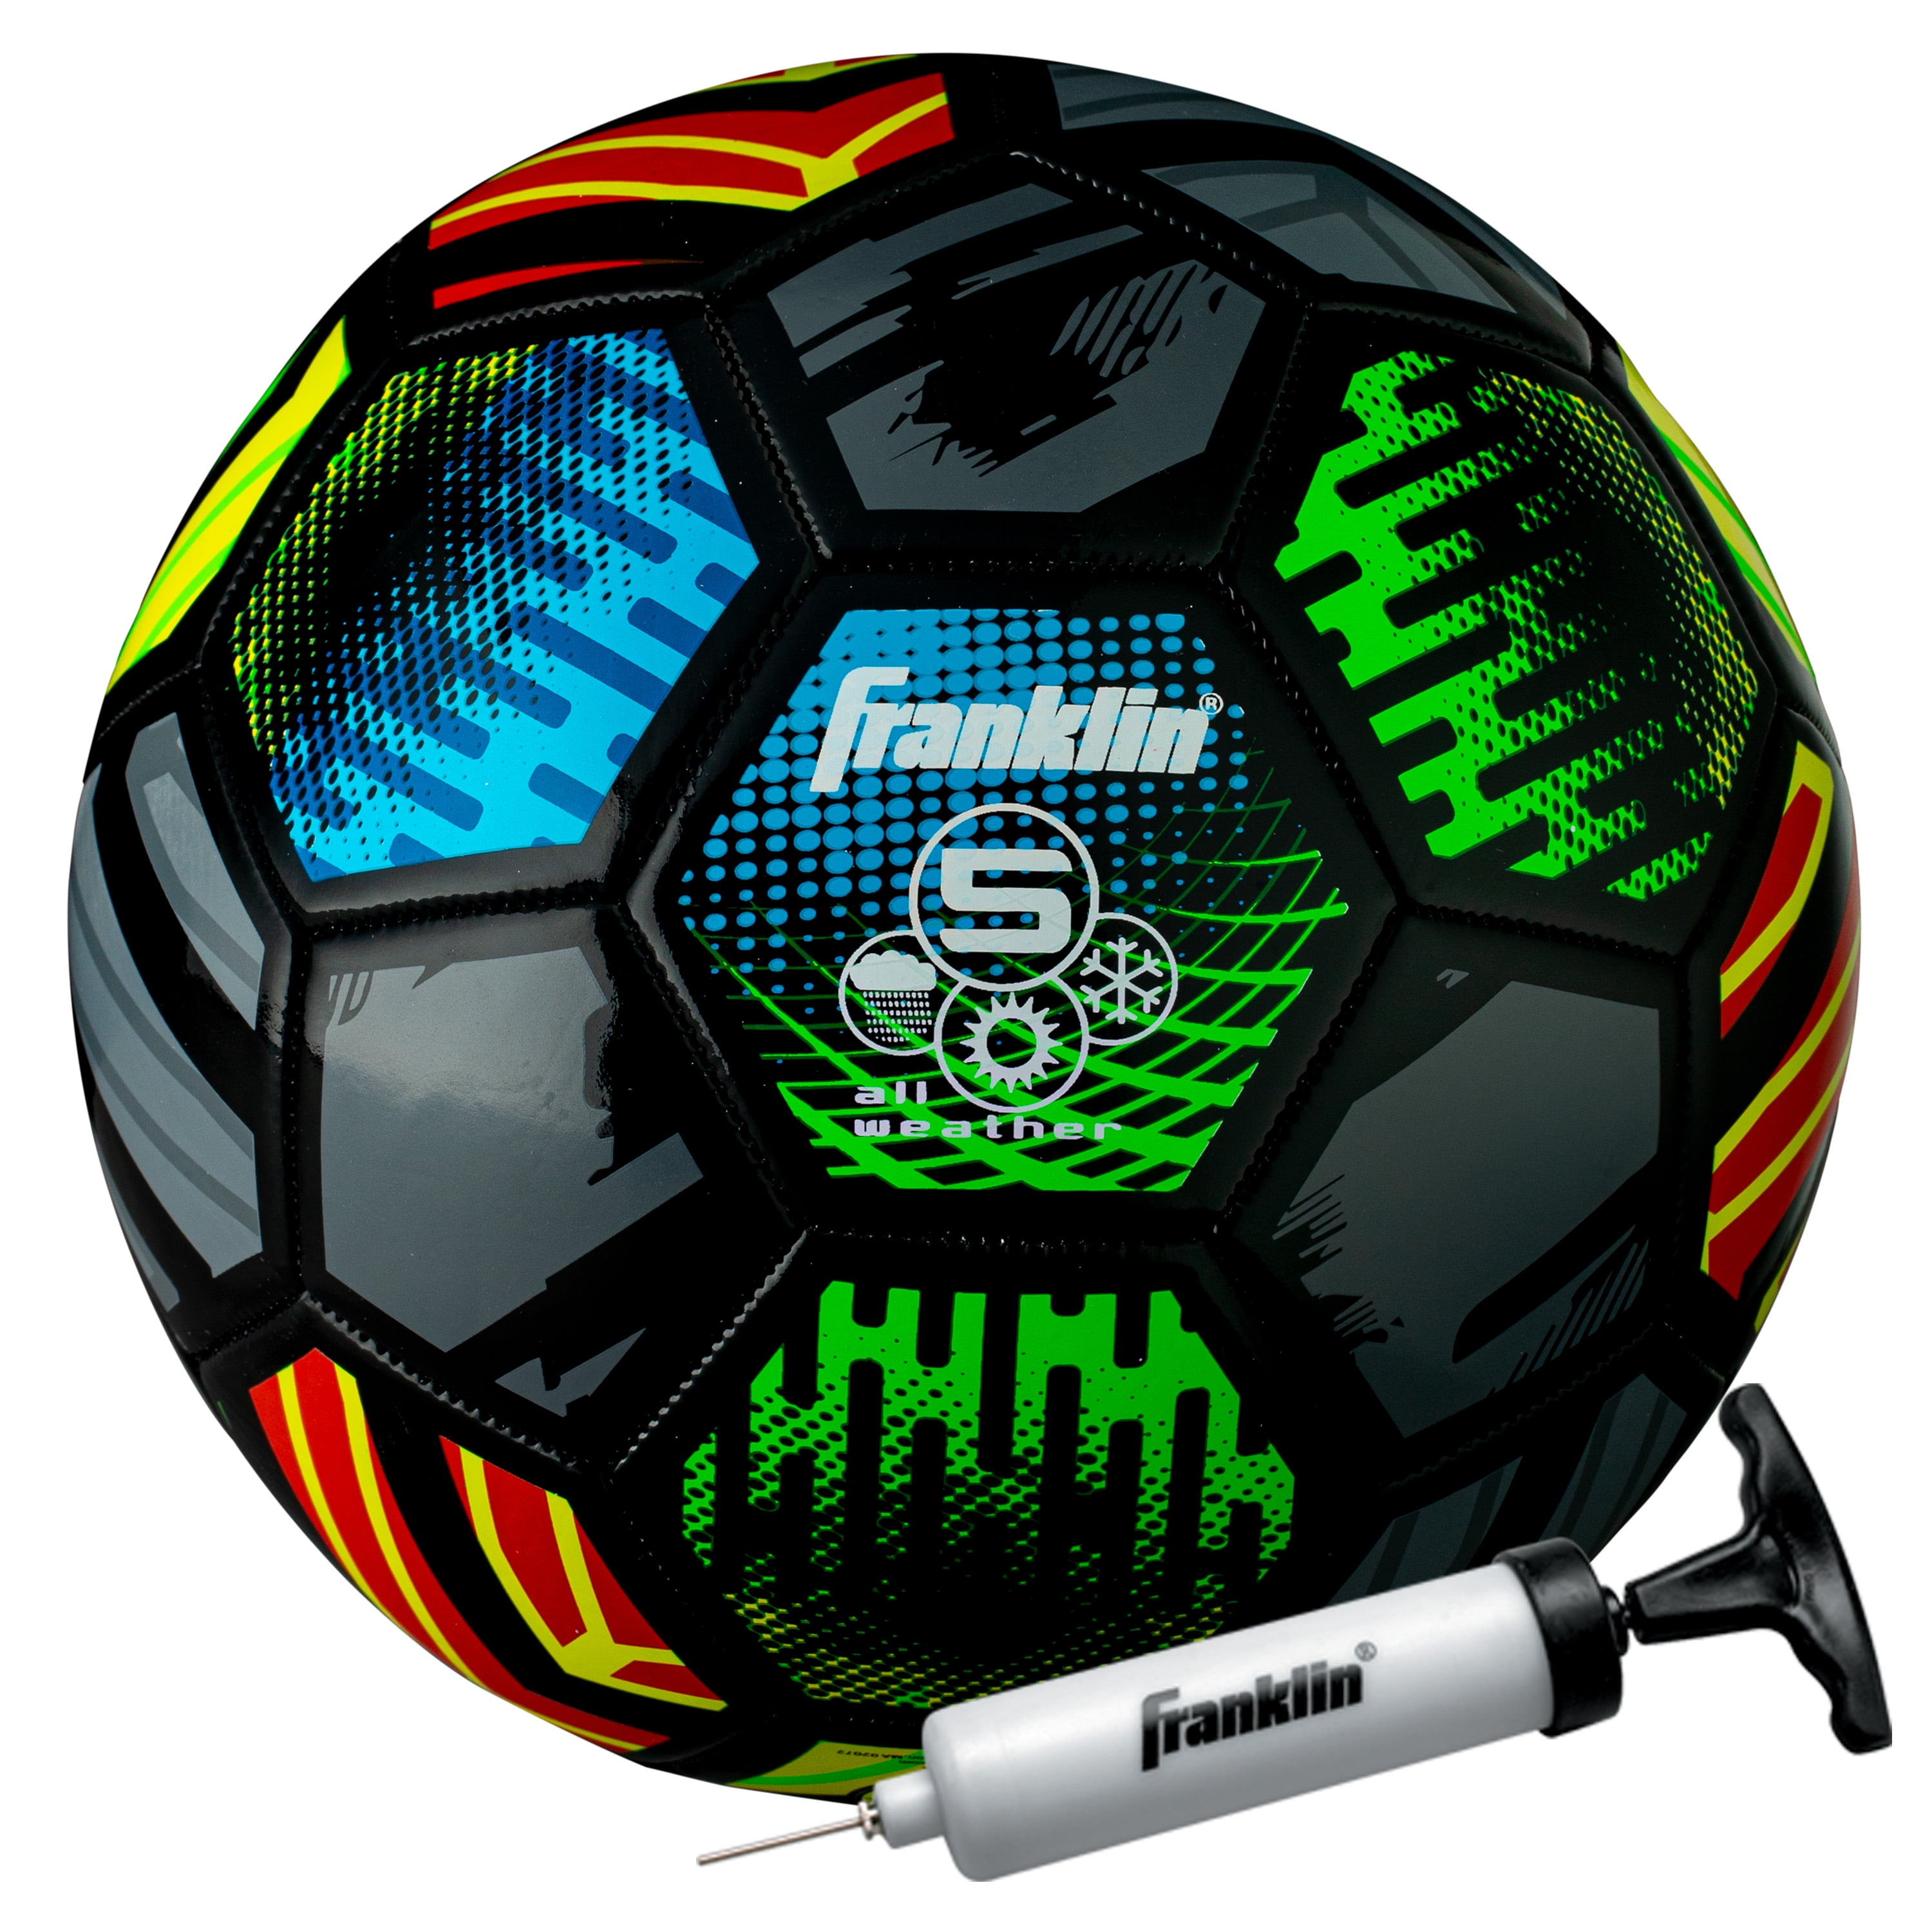 OFFICIAL FX 3D DECO LIGHT FUTBOL/SOCCER BALL BATTERY OPERATED SCREWS INCLUDED 